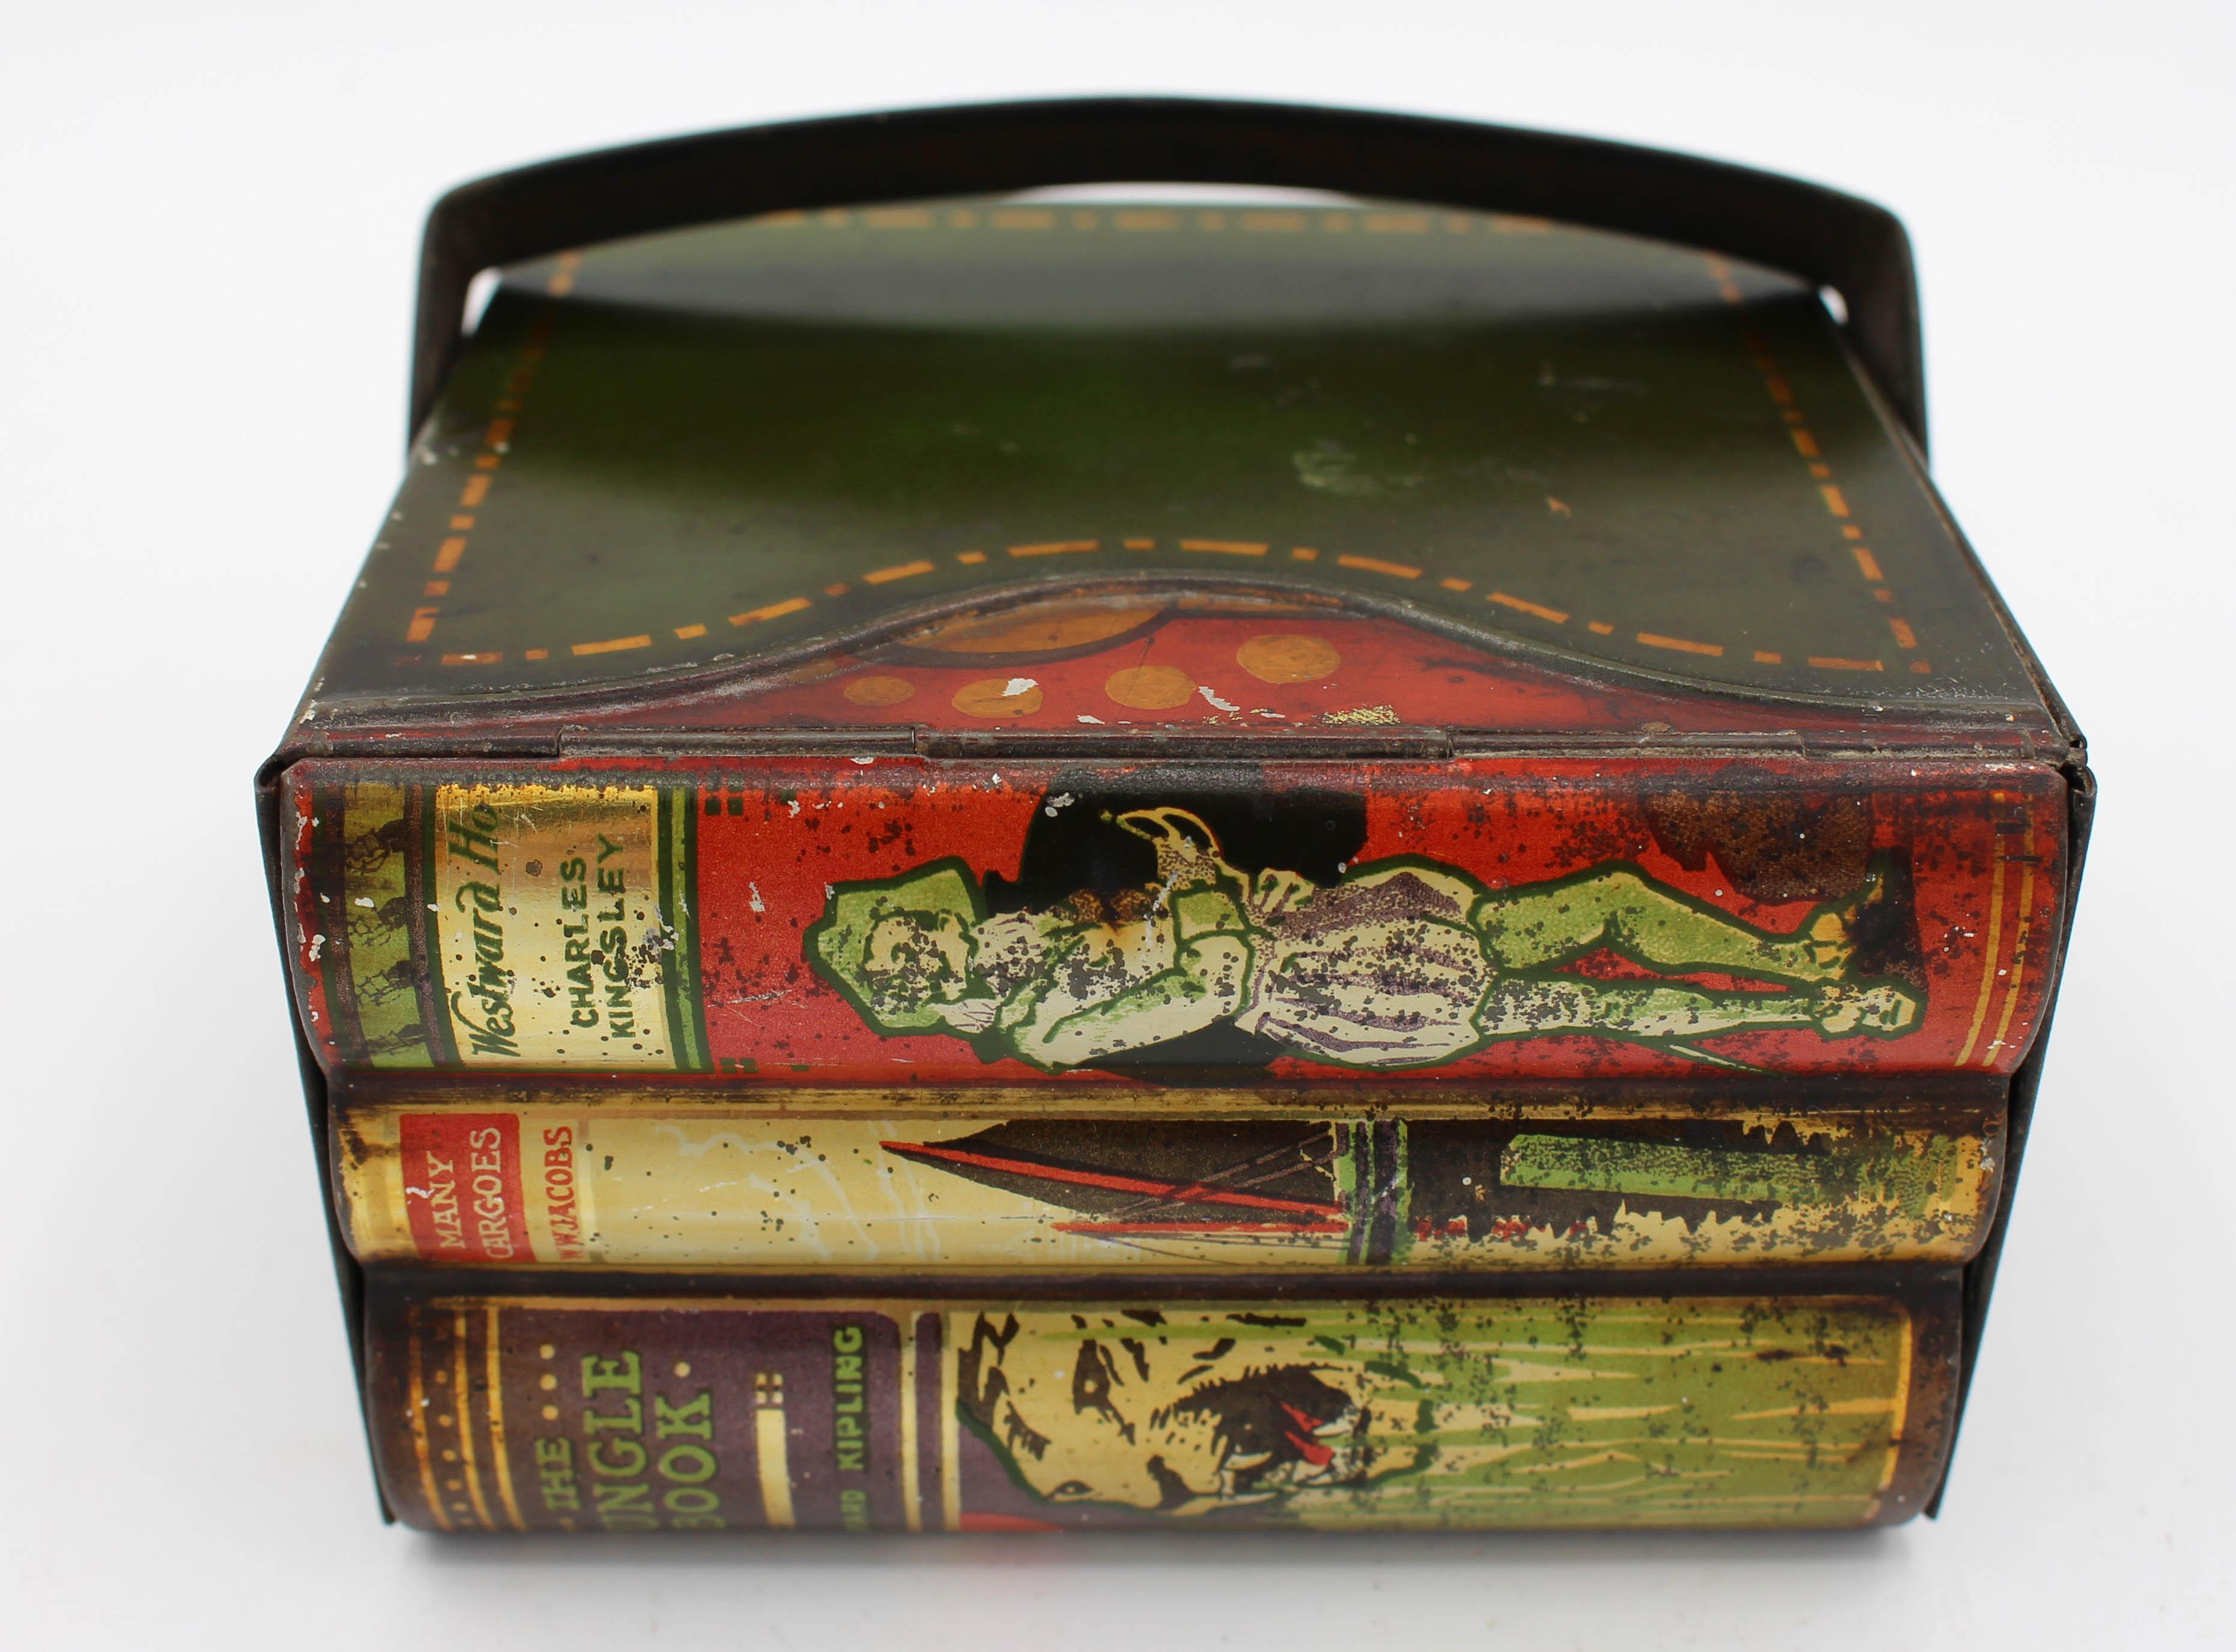 Aesthetic Movement Early 20th Century Child's Book & Carrier Form Biscuit Tin by Hutley & Palmers